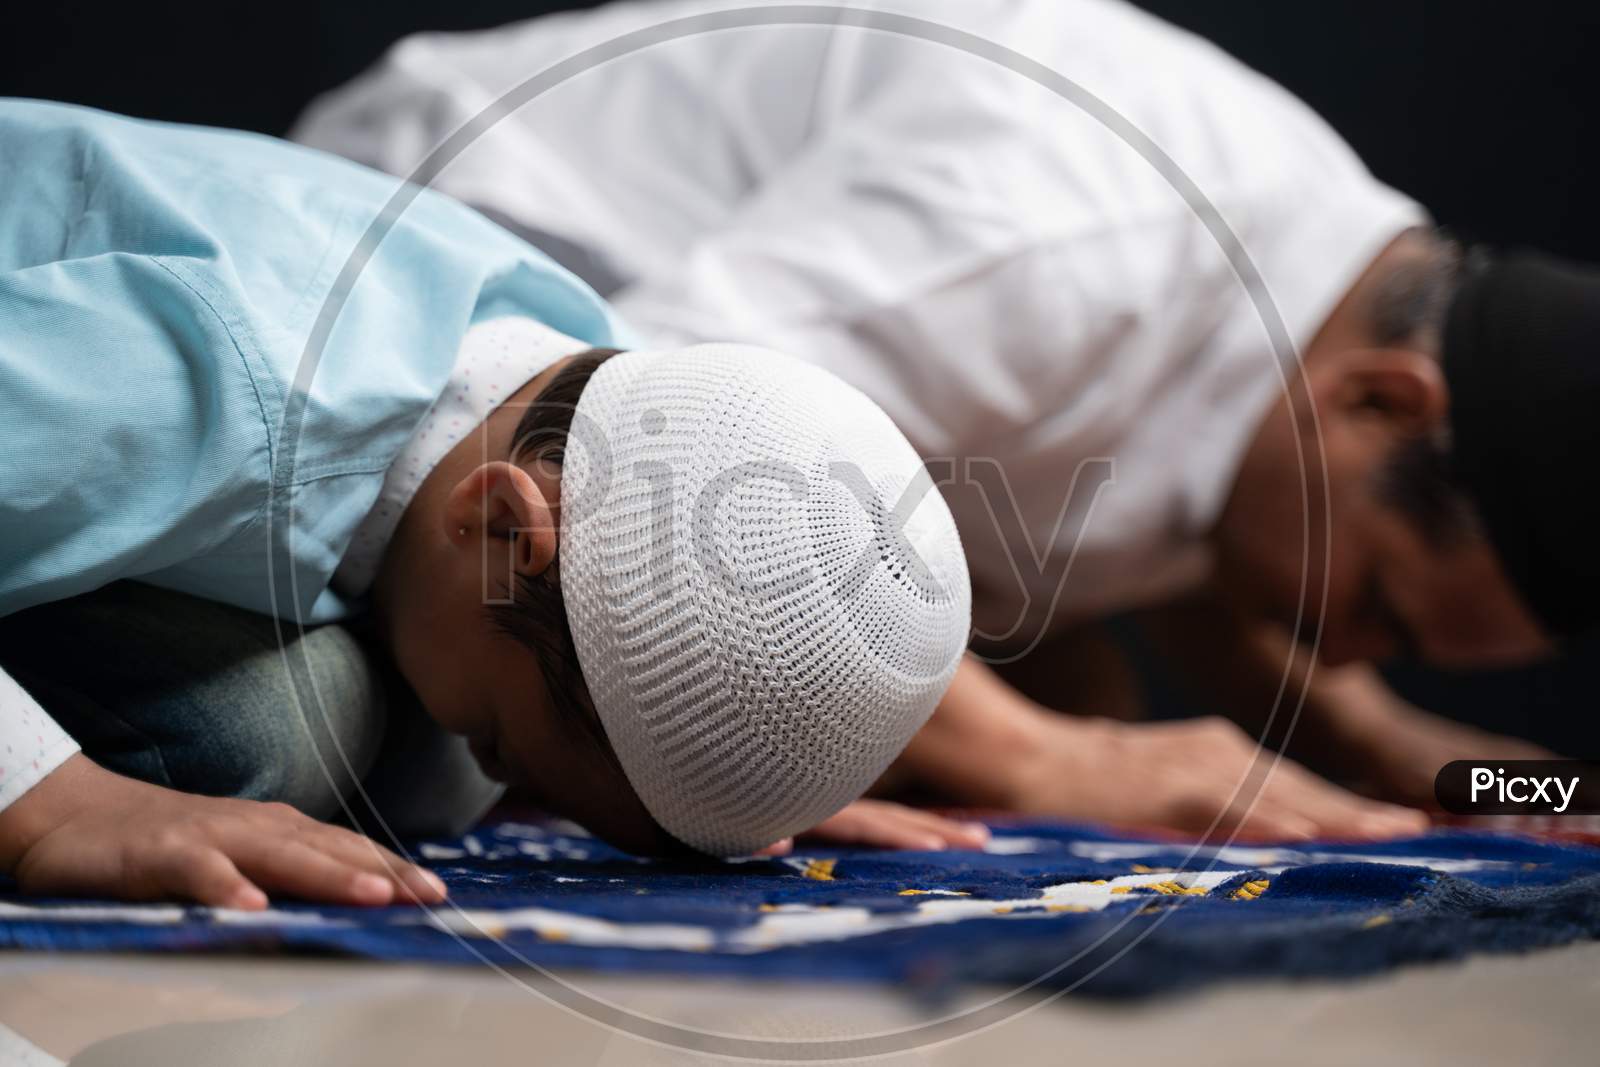 Muslim Father And Son Praying Or Performing Salah While Sitting On Prayer Rug And Touching Head To Mihrab Or Mosque Printed On Rug.